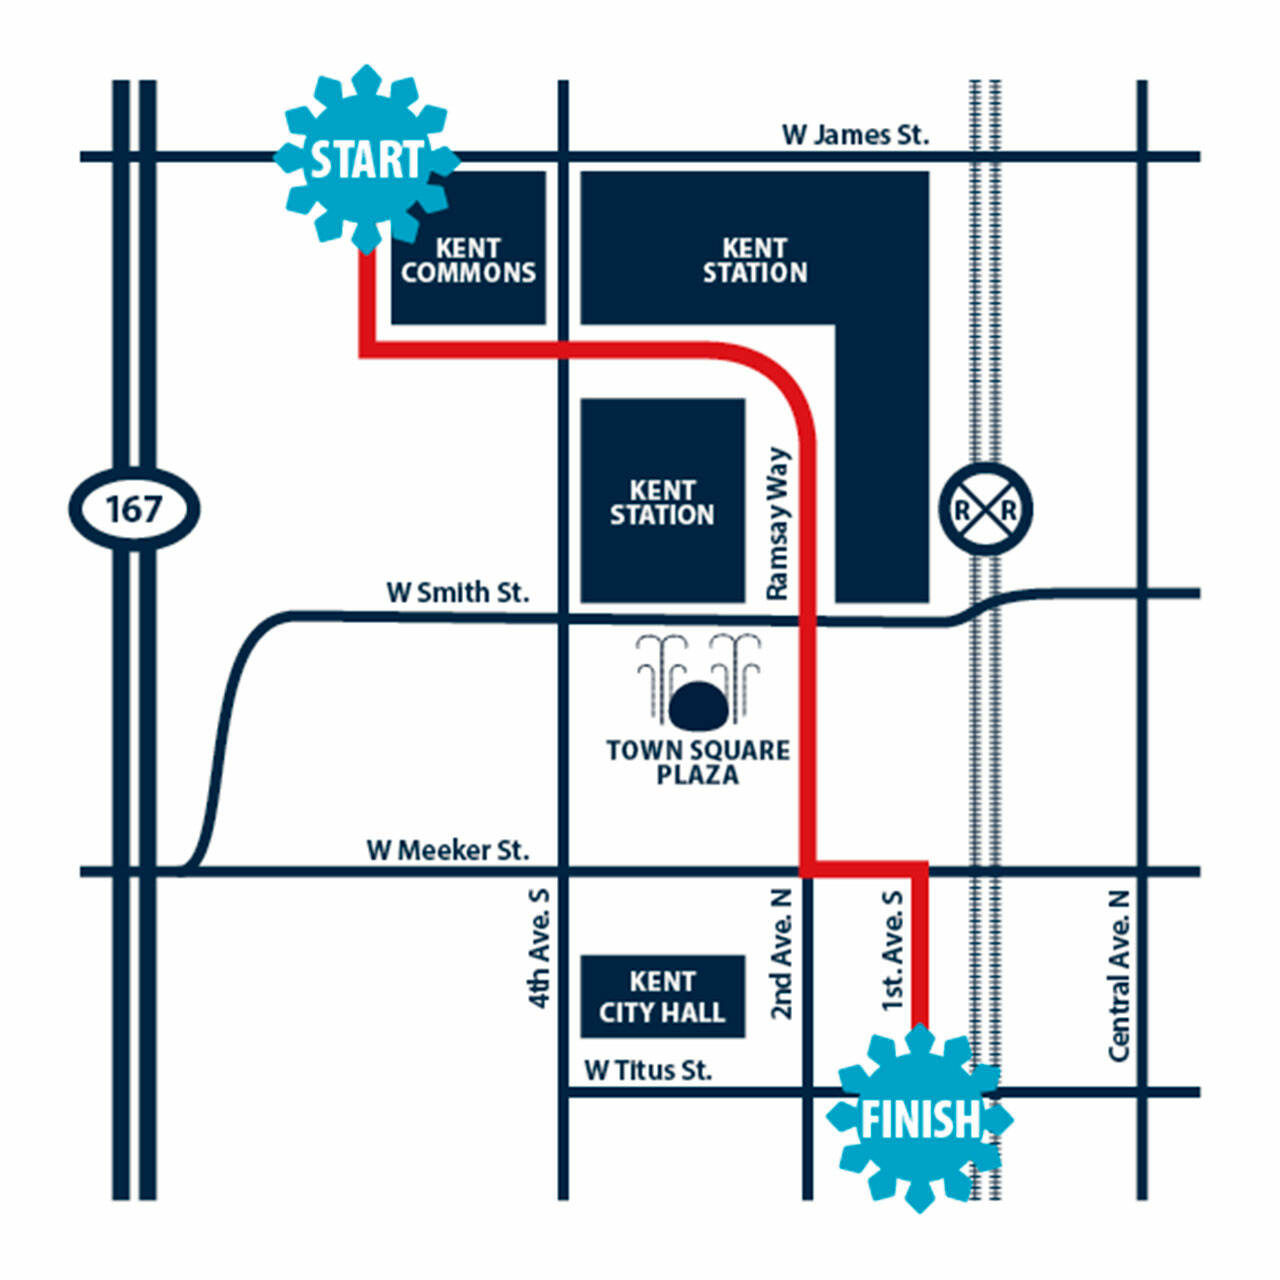 The route for the Winterfest parade in Kent at 4:30 p.m. on Saturday, Dec. 4. COURTESY GRAPHIC, City of Kent